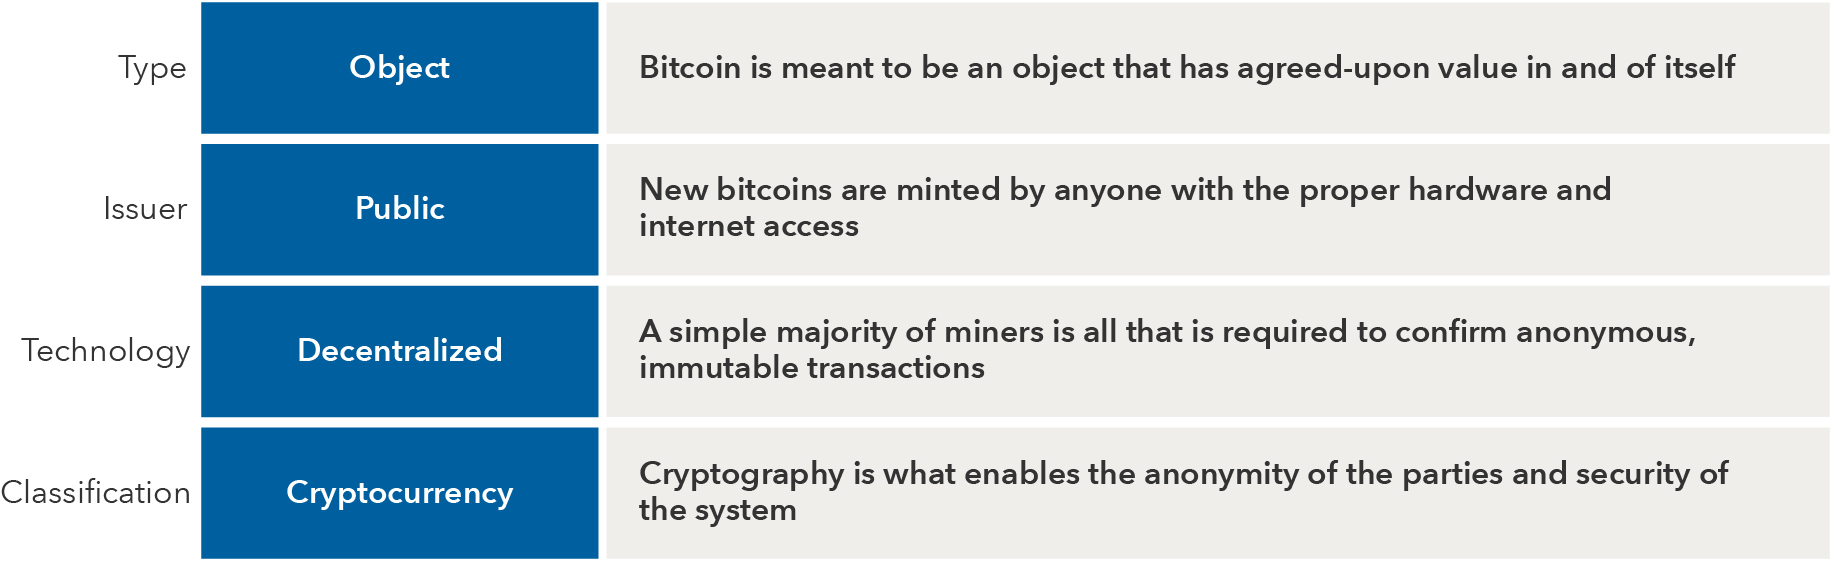 This graphic displays some basics about Bitcoin. Bitcoin is meant to be an object that has agreed-upon value in and of itself. New bitcoins are minted by anyone with the proper hardware and internet access. A simple majority of miners is all that is required to confirm anonymous, immutable transactions. Cryptography is what enables the anonymity of the parties and security of the system. Source: Capital Group.